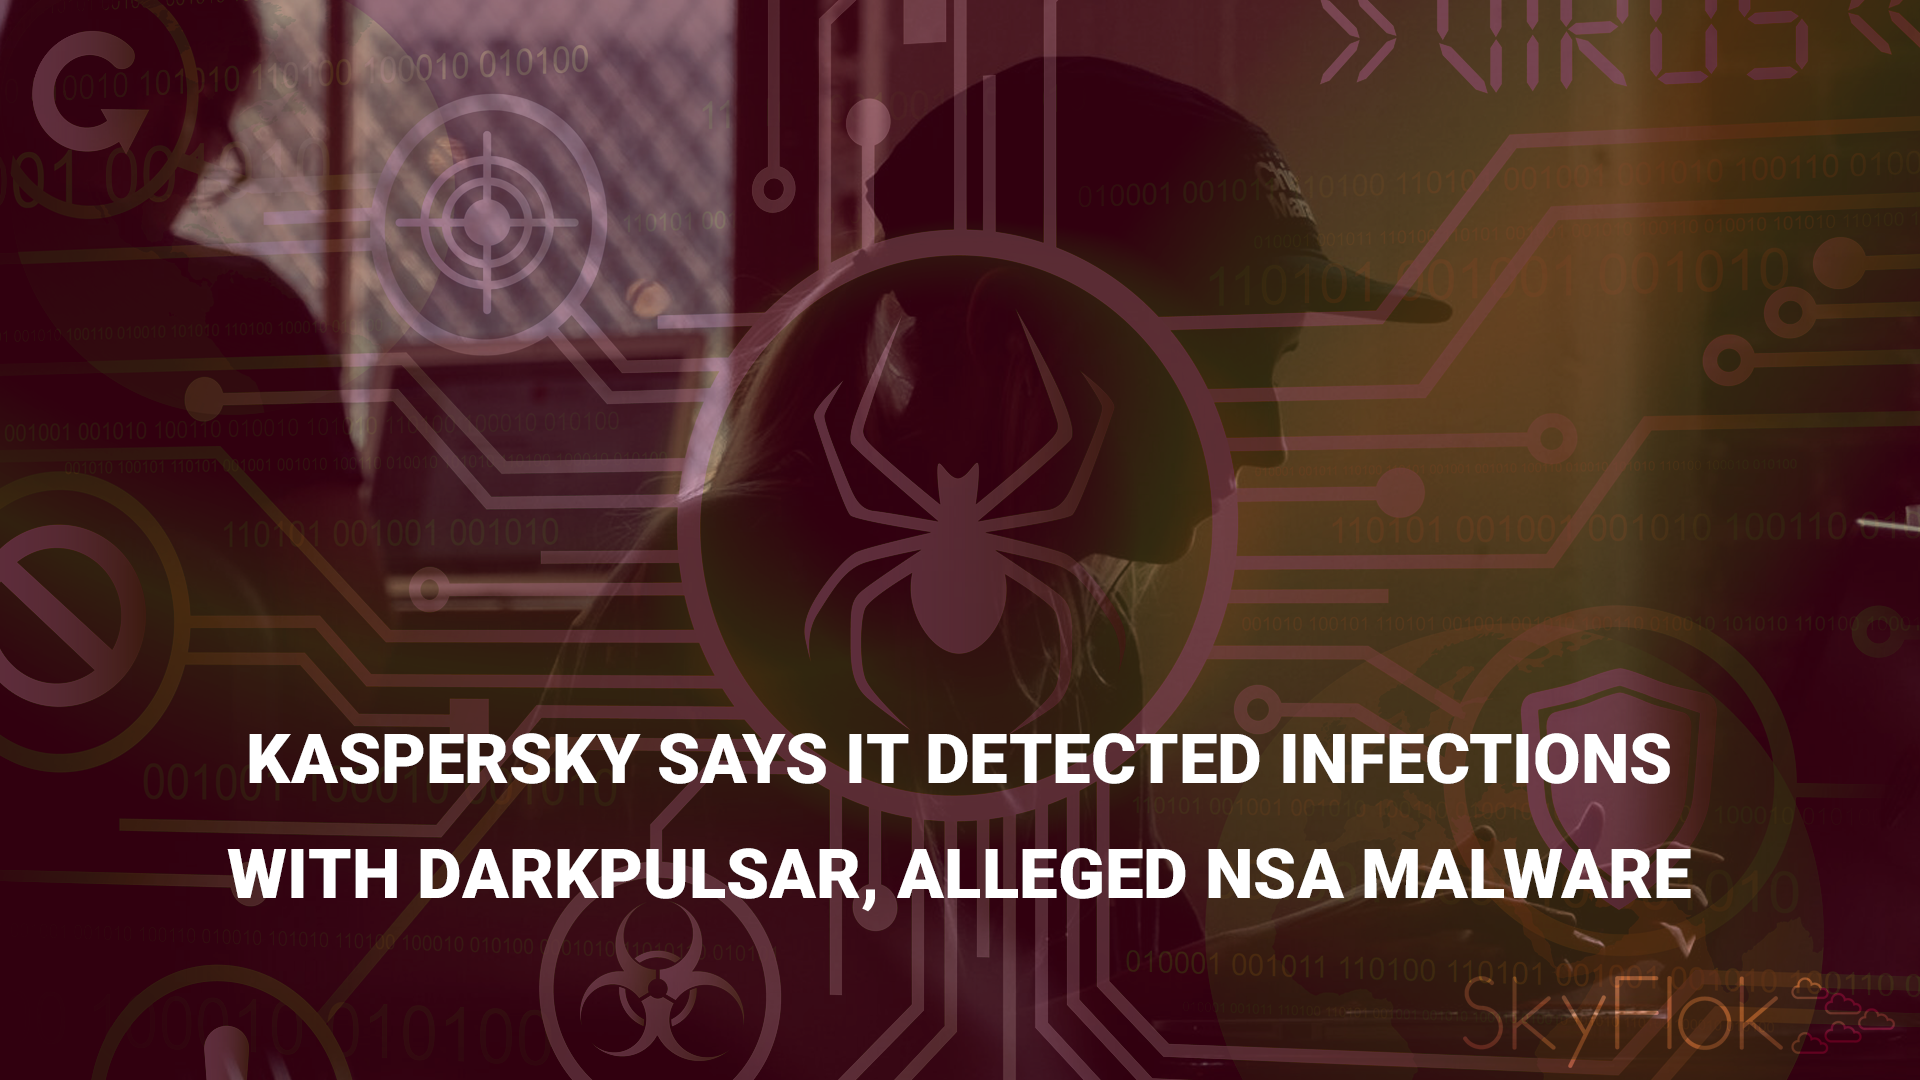 You are currently viewing Kaspersky says it detected infections with DarkPulsar, alleged NSA malware